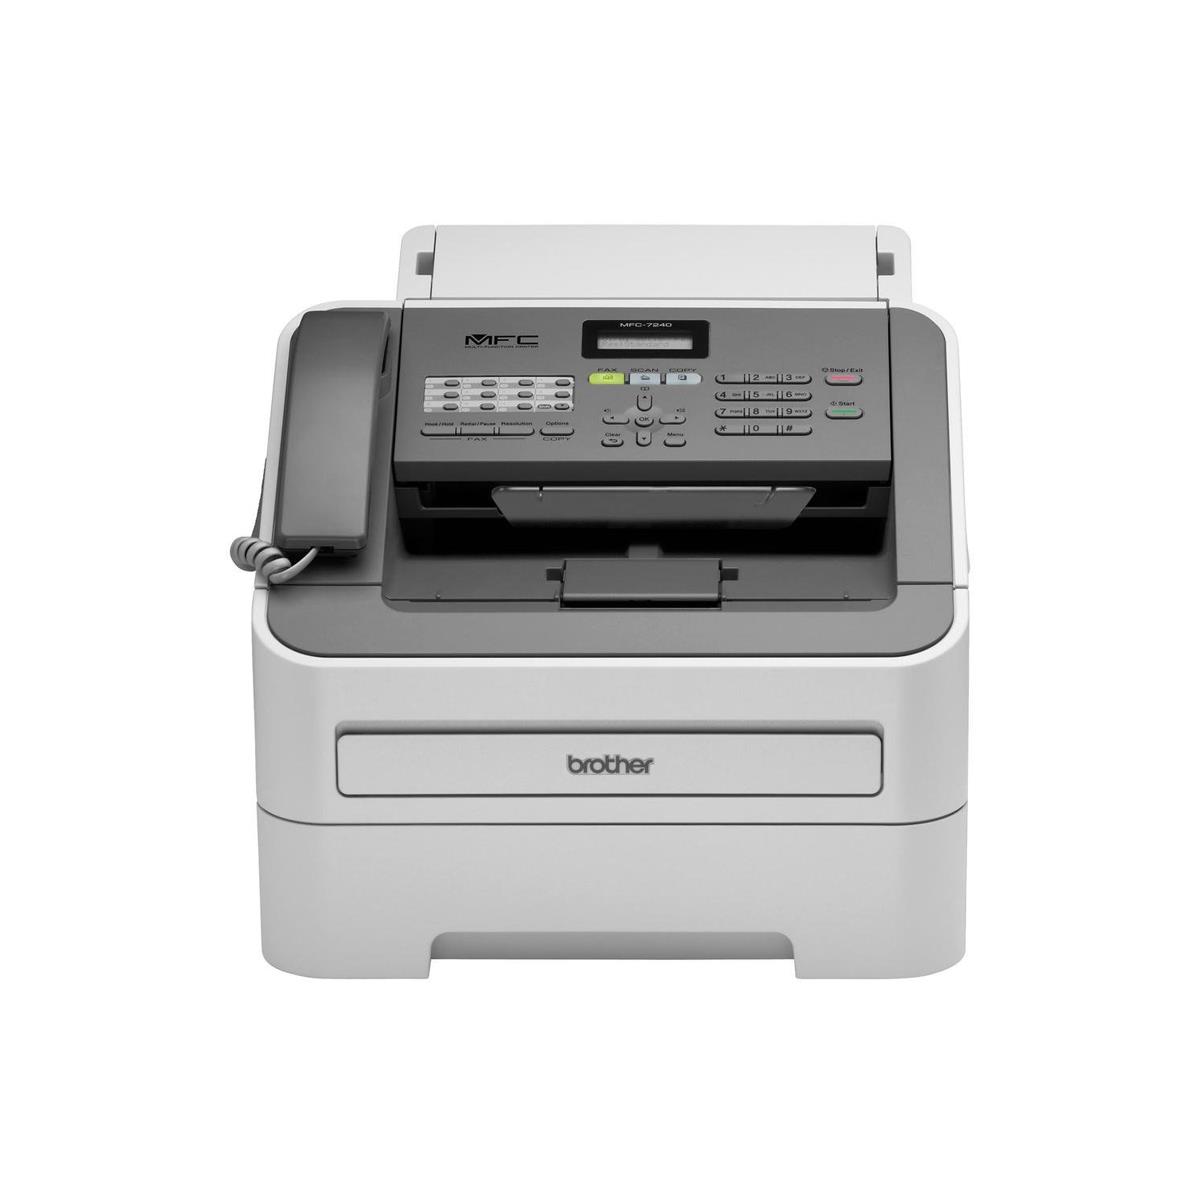 Image of Brother MFC-7240 Monochrome Laser Multifunction Printer